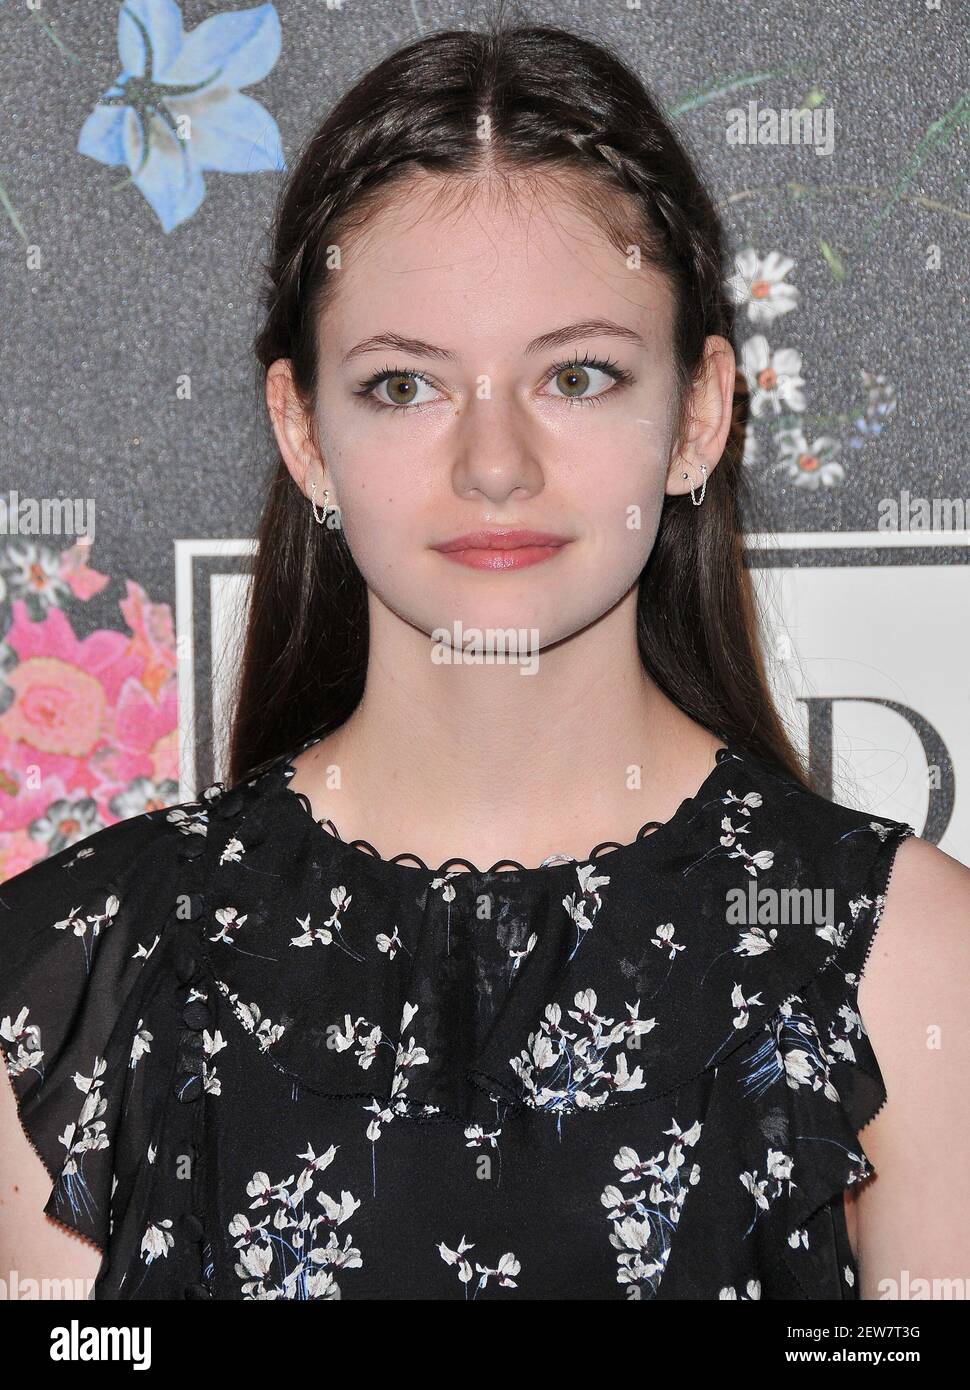 Mackenzie Foy arrives at the ERDEM x H&M Los Angeles Event held at The Ebell of Los Angeles in Los Angeles, CA on Wednesday, October 18, 2017. (Photo By Sthanlee B. Mirador/Sipa USA) Stock Photo